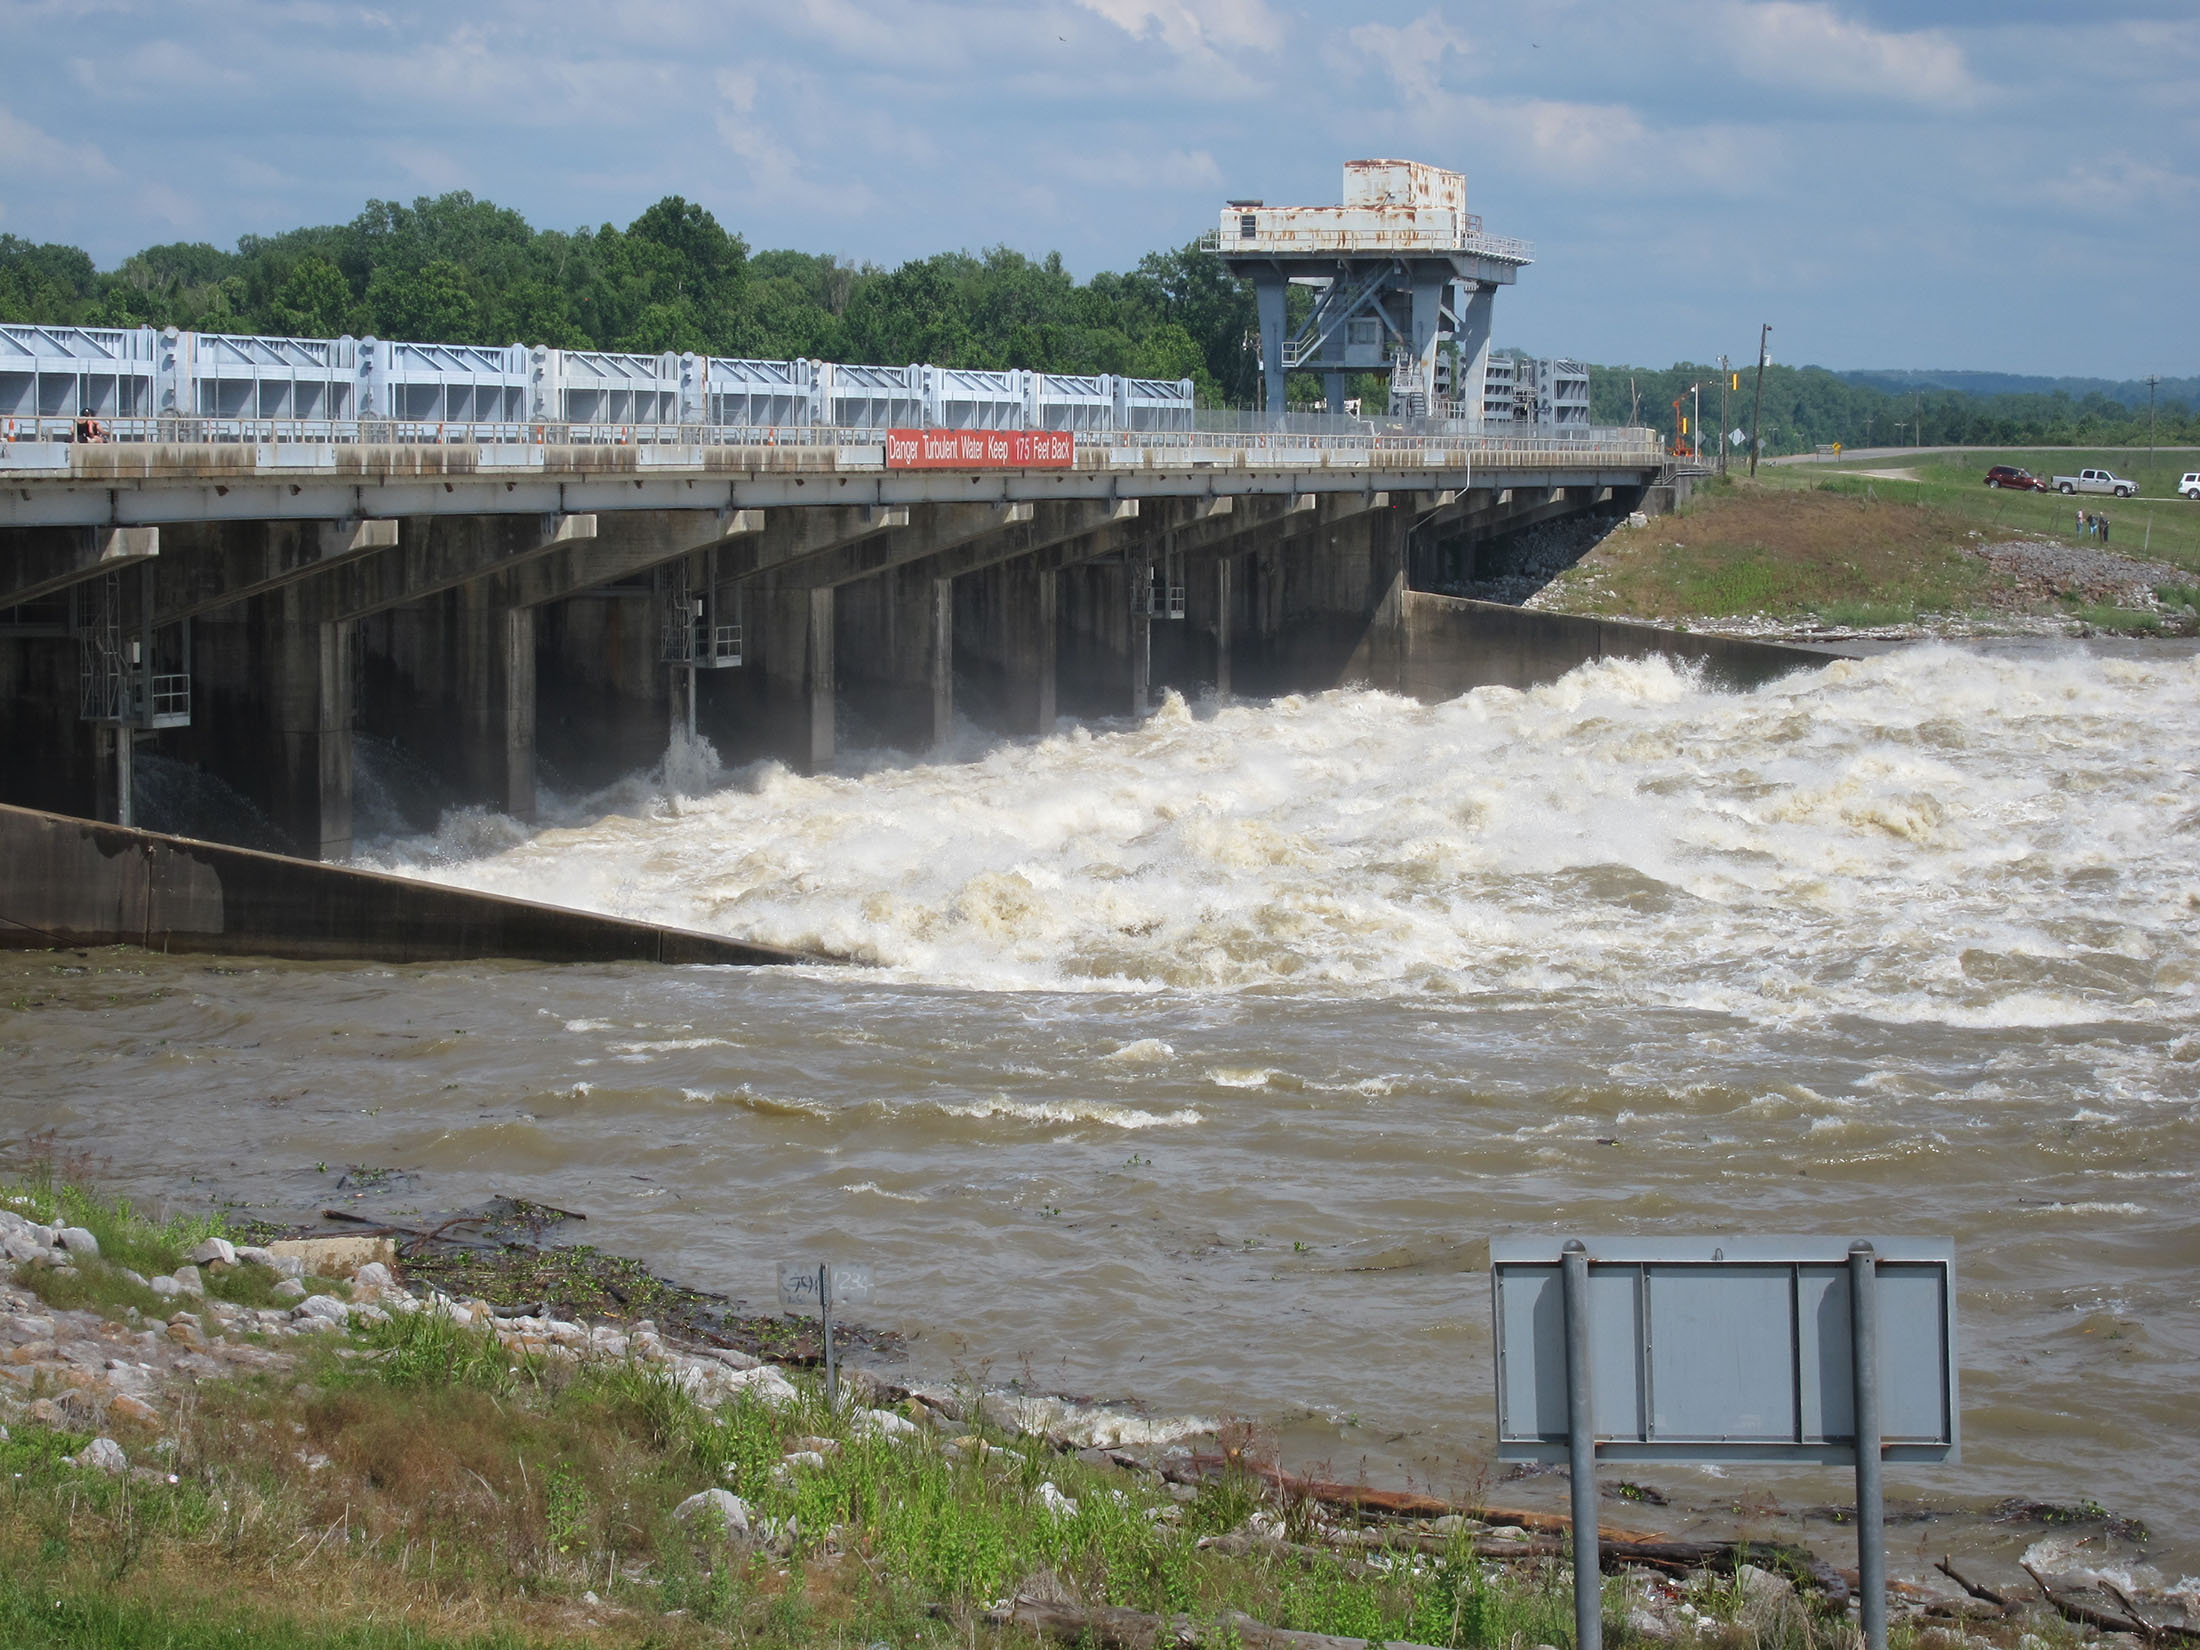 The Old River Control Structure diverts 30 percent of the combined flow of the Mississippi and Red Rivers into the Atchafalaya Basin, carrying tons of sediment with it. (Courtesy Tobin/Creative Commons)